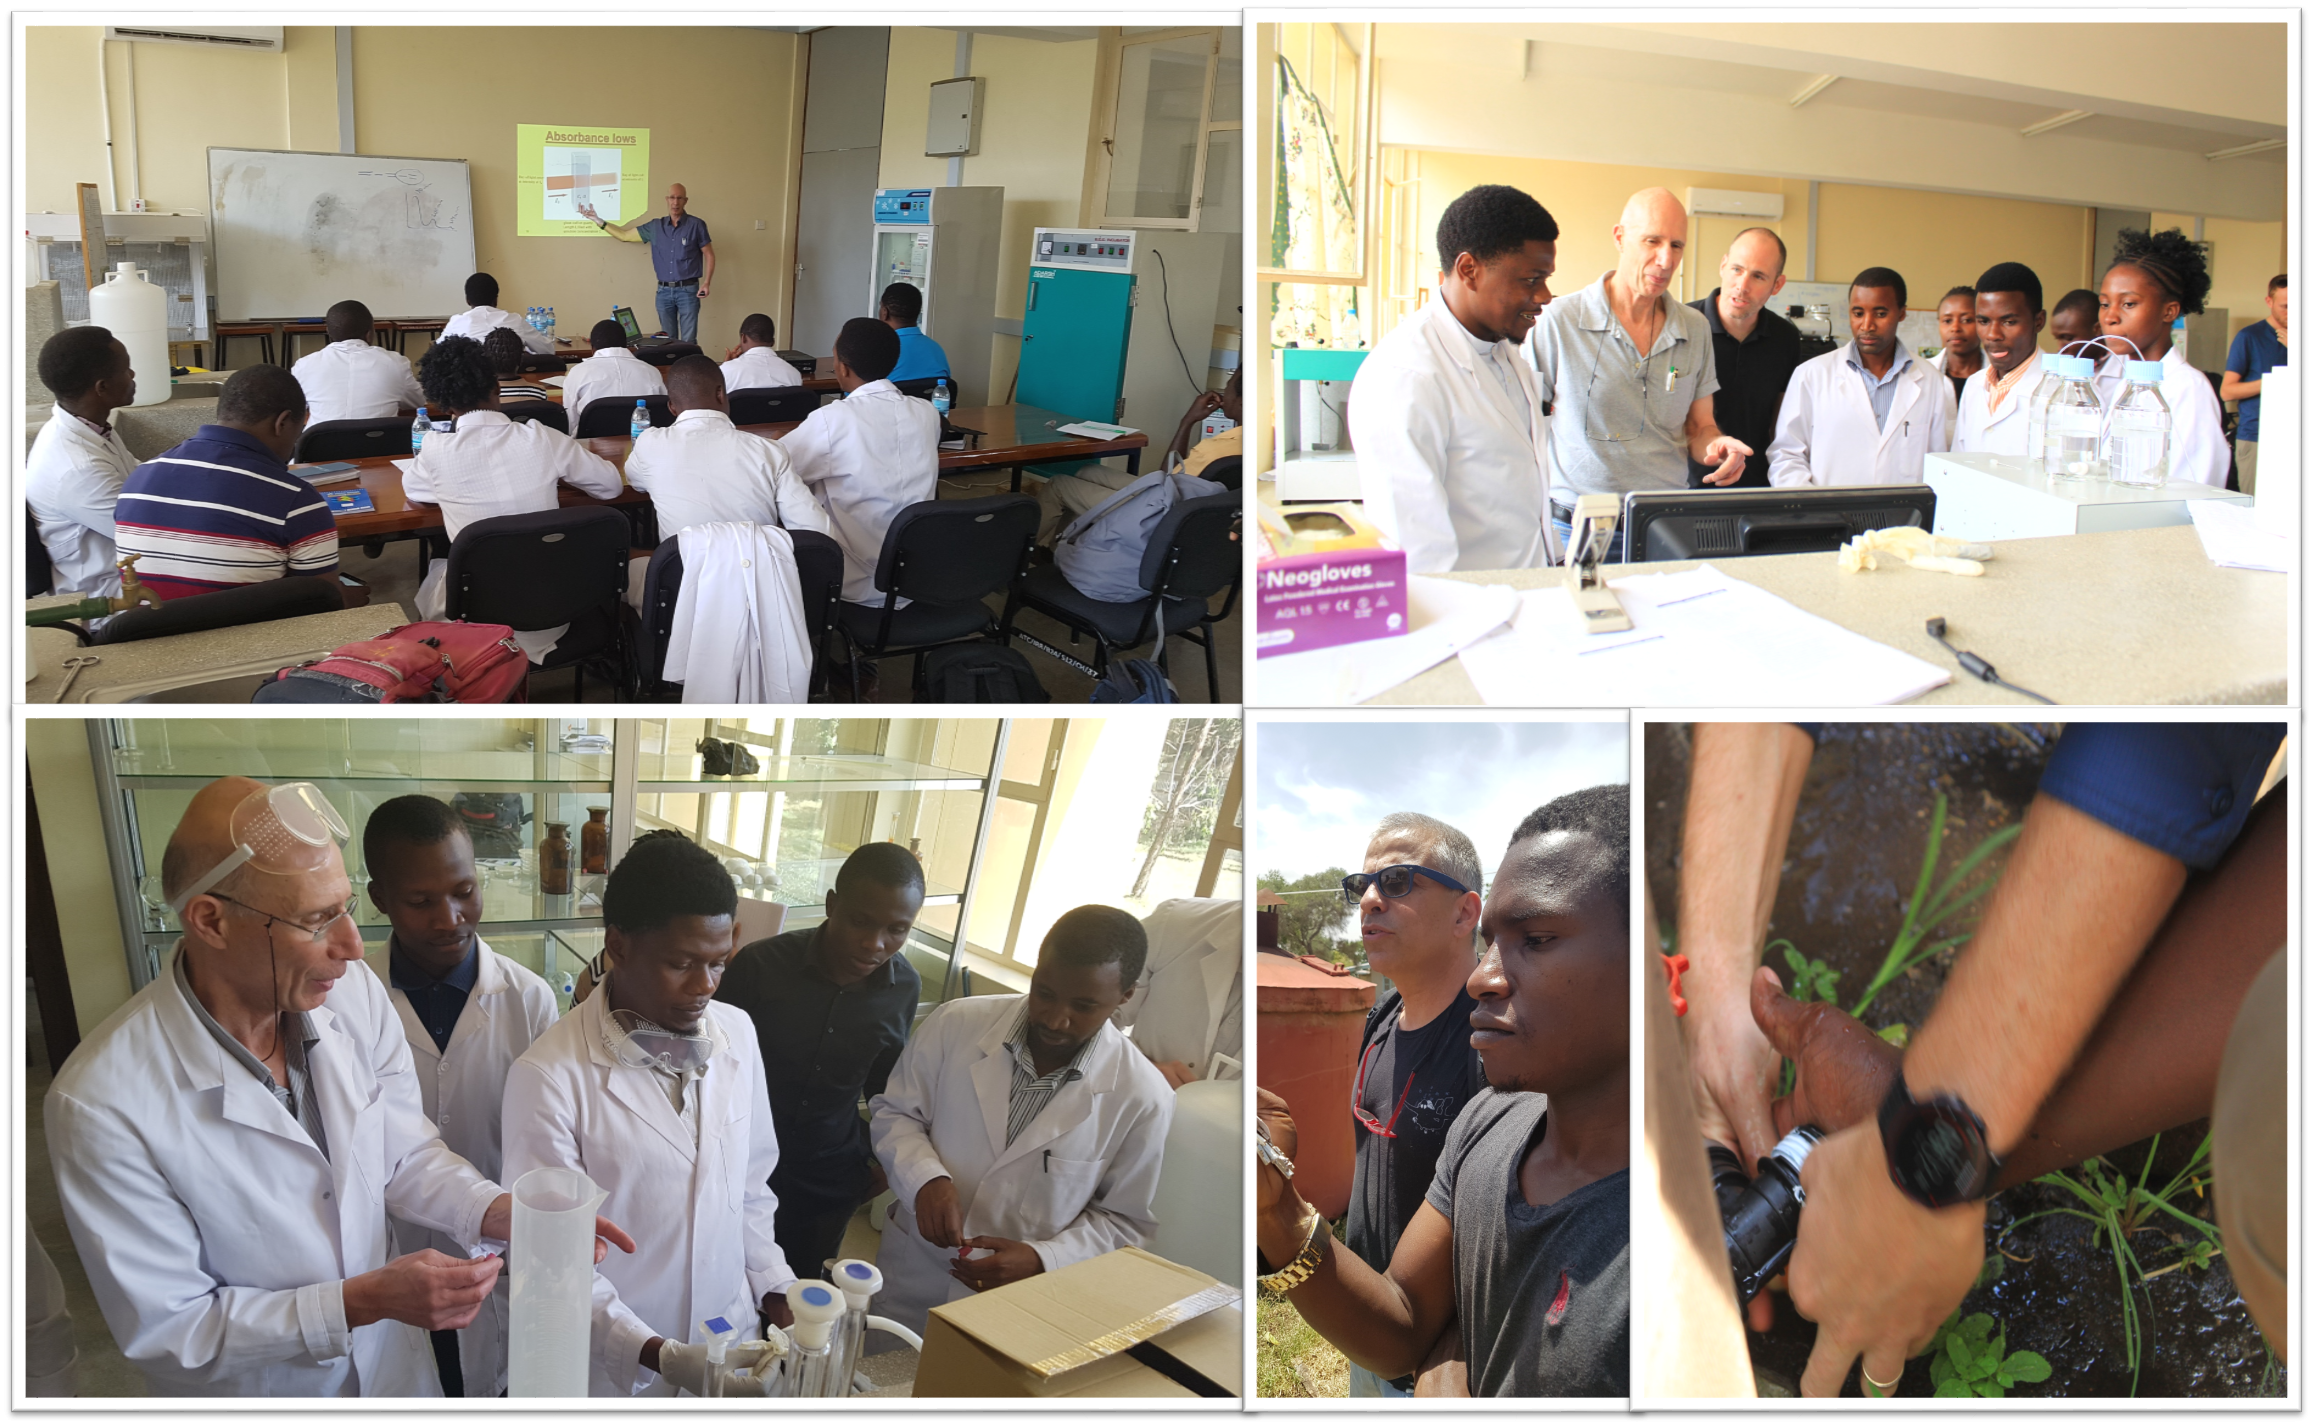 A visit to Tanzania as part of the collaboration between WRC-TAU and Engineers Without Borders